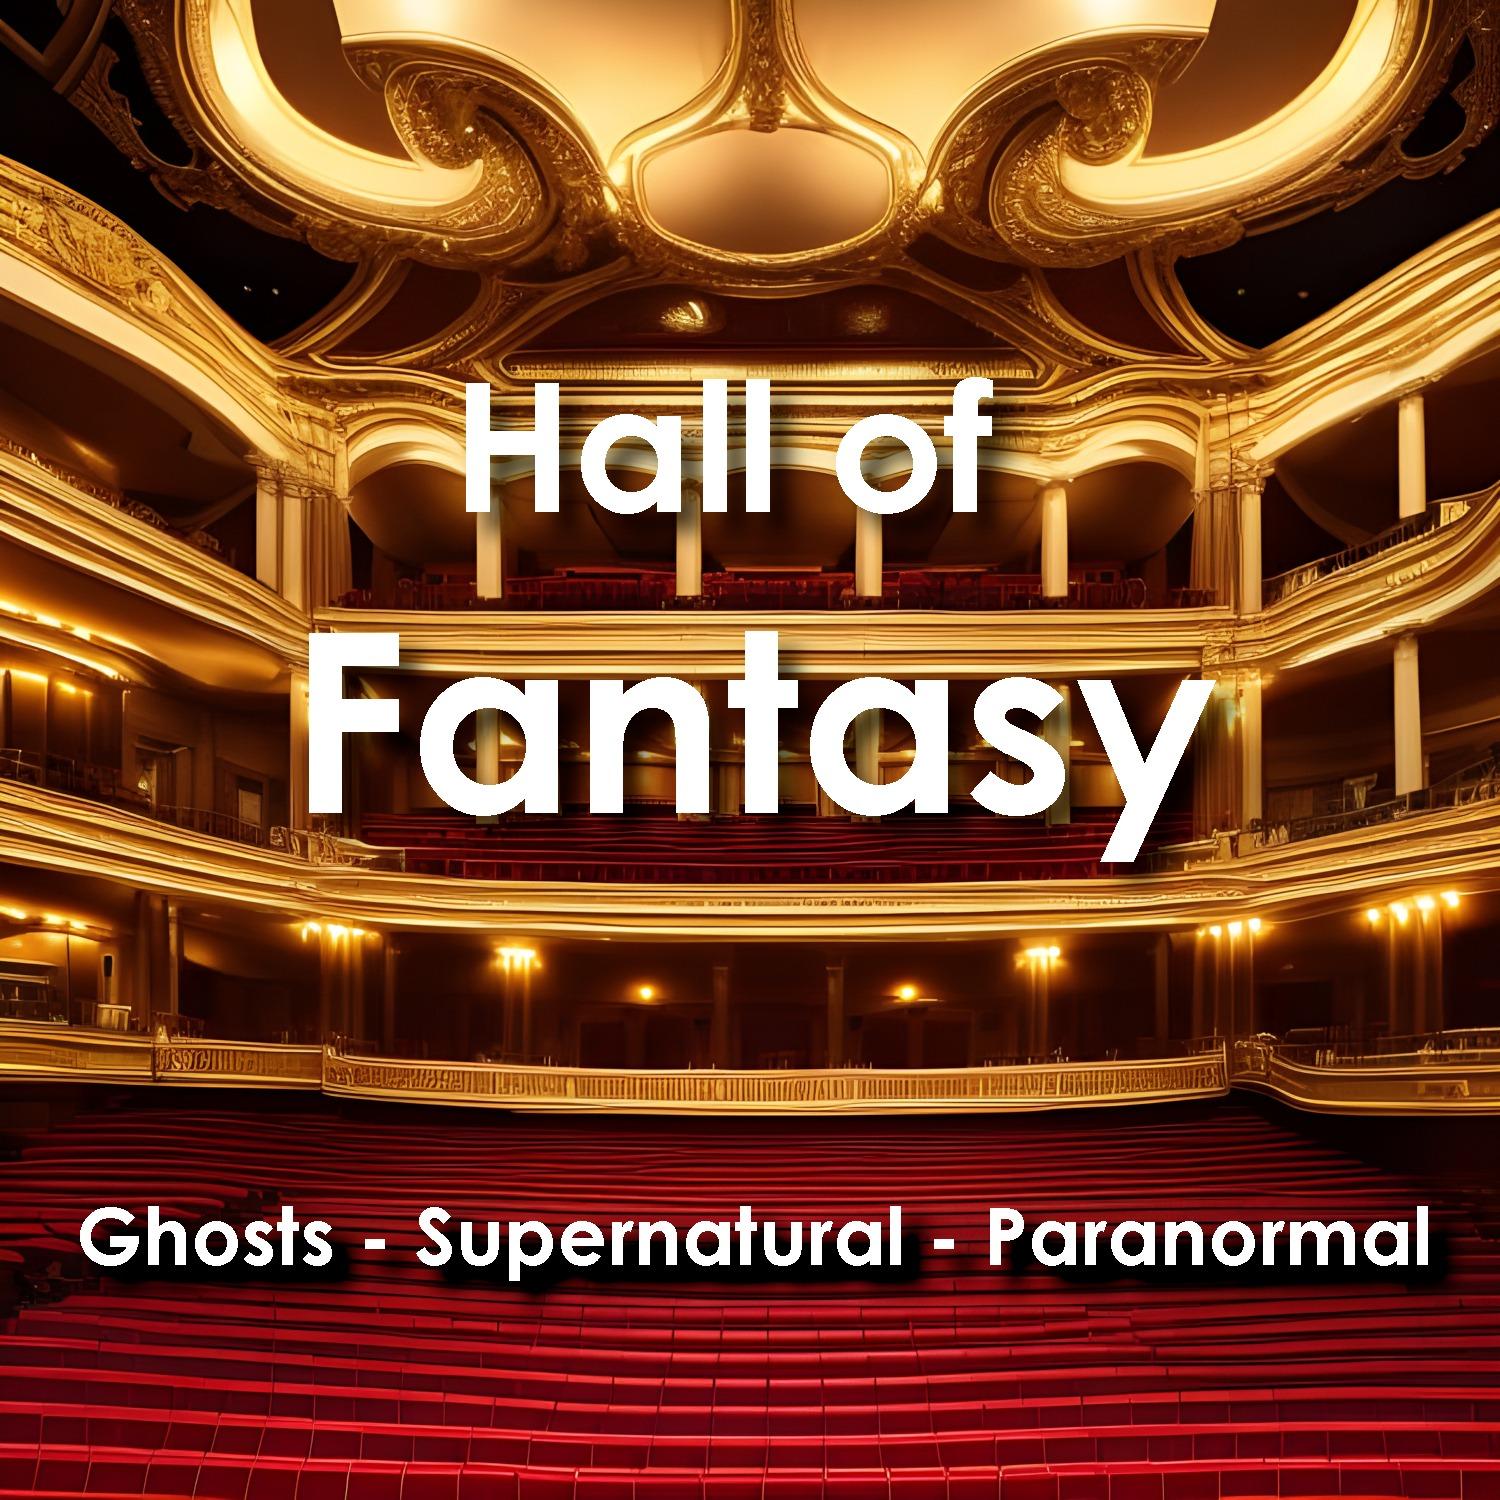 Hall of Fantasy: Supernatural Beings, Ancient Curses, Haunted Houses